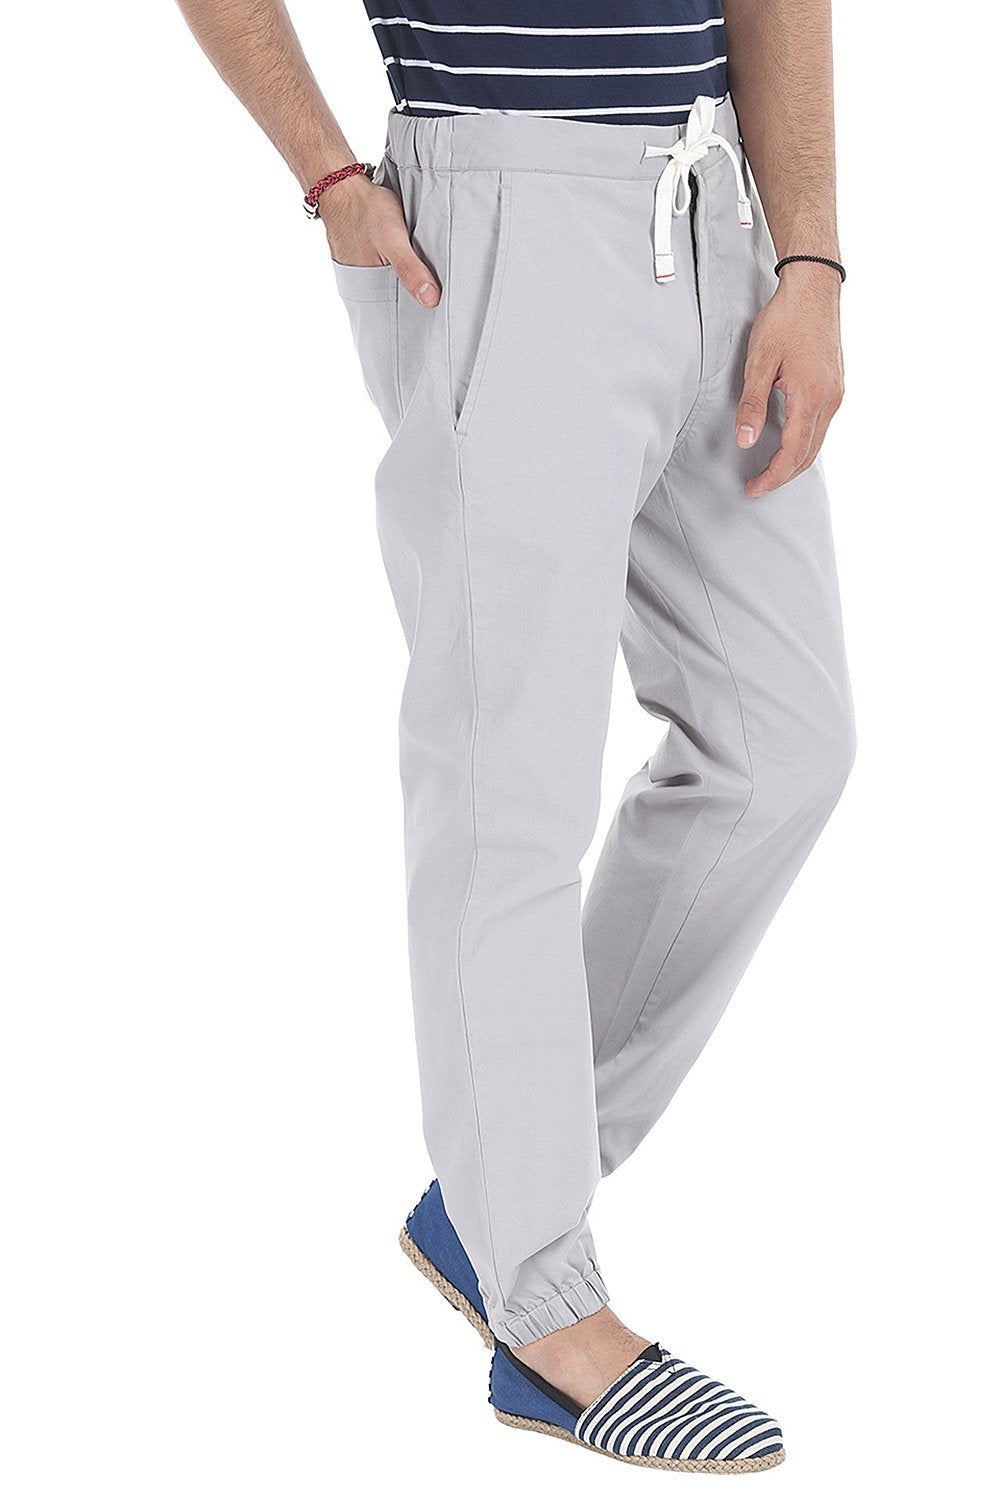 Enzyme Washed Lightweight Cotton Twill Pant – Zobello